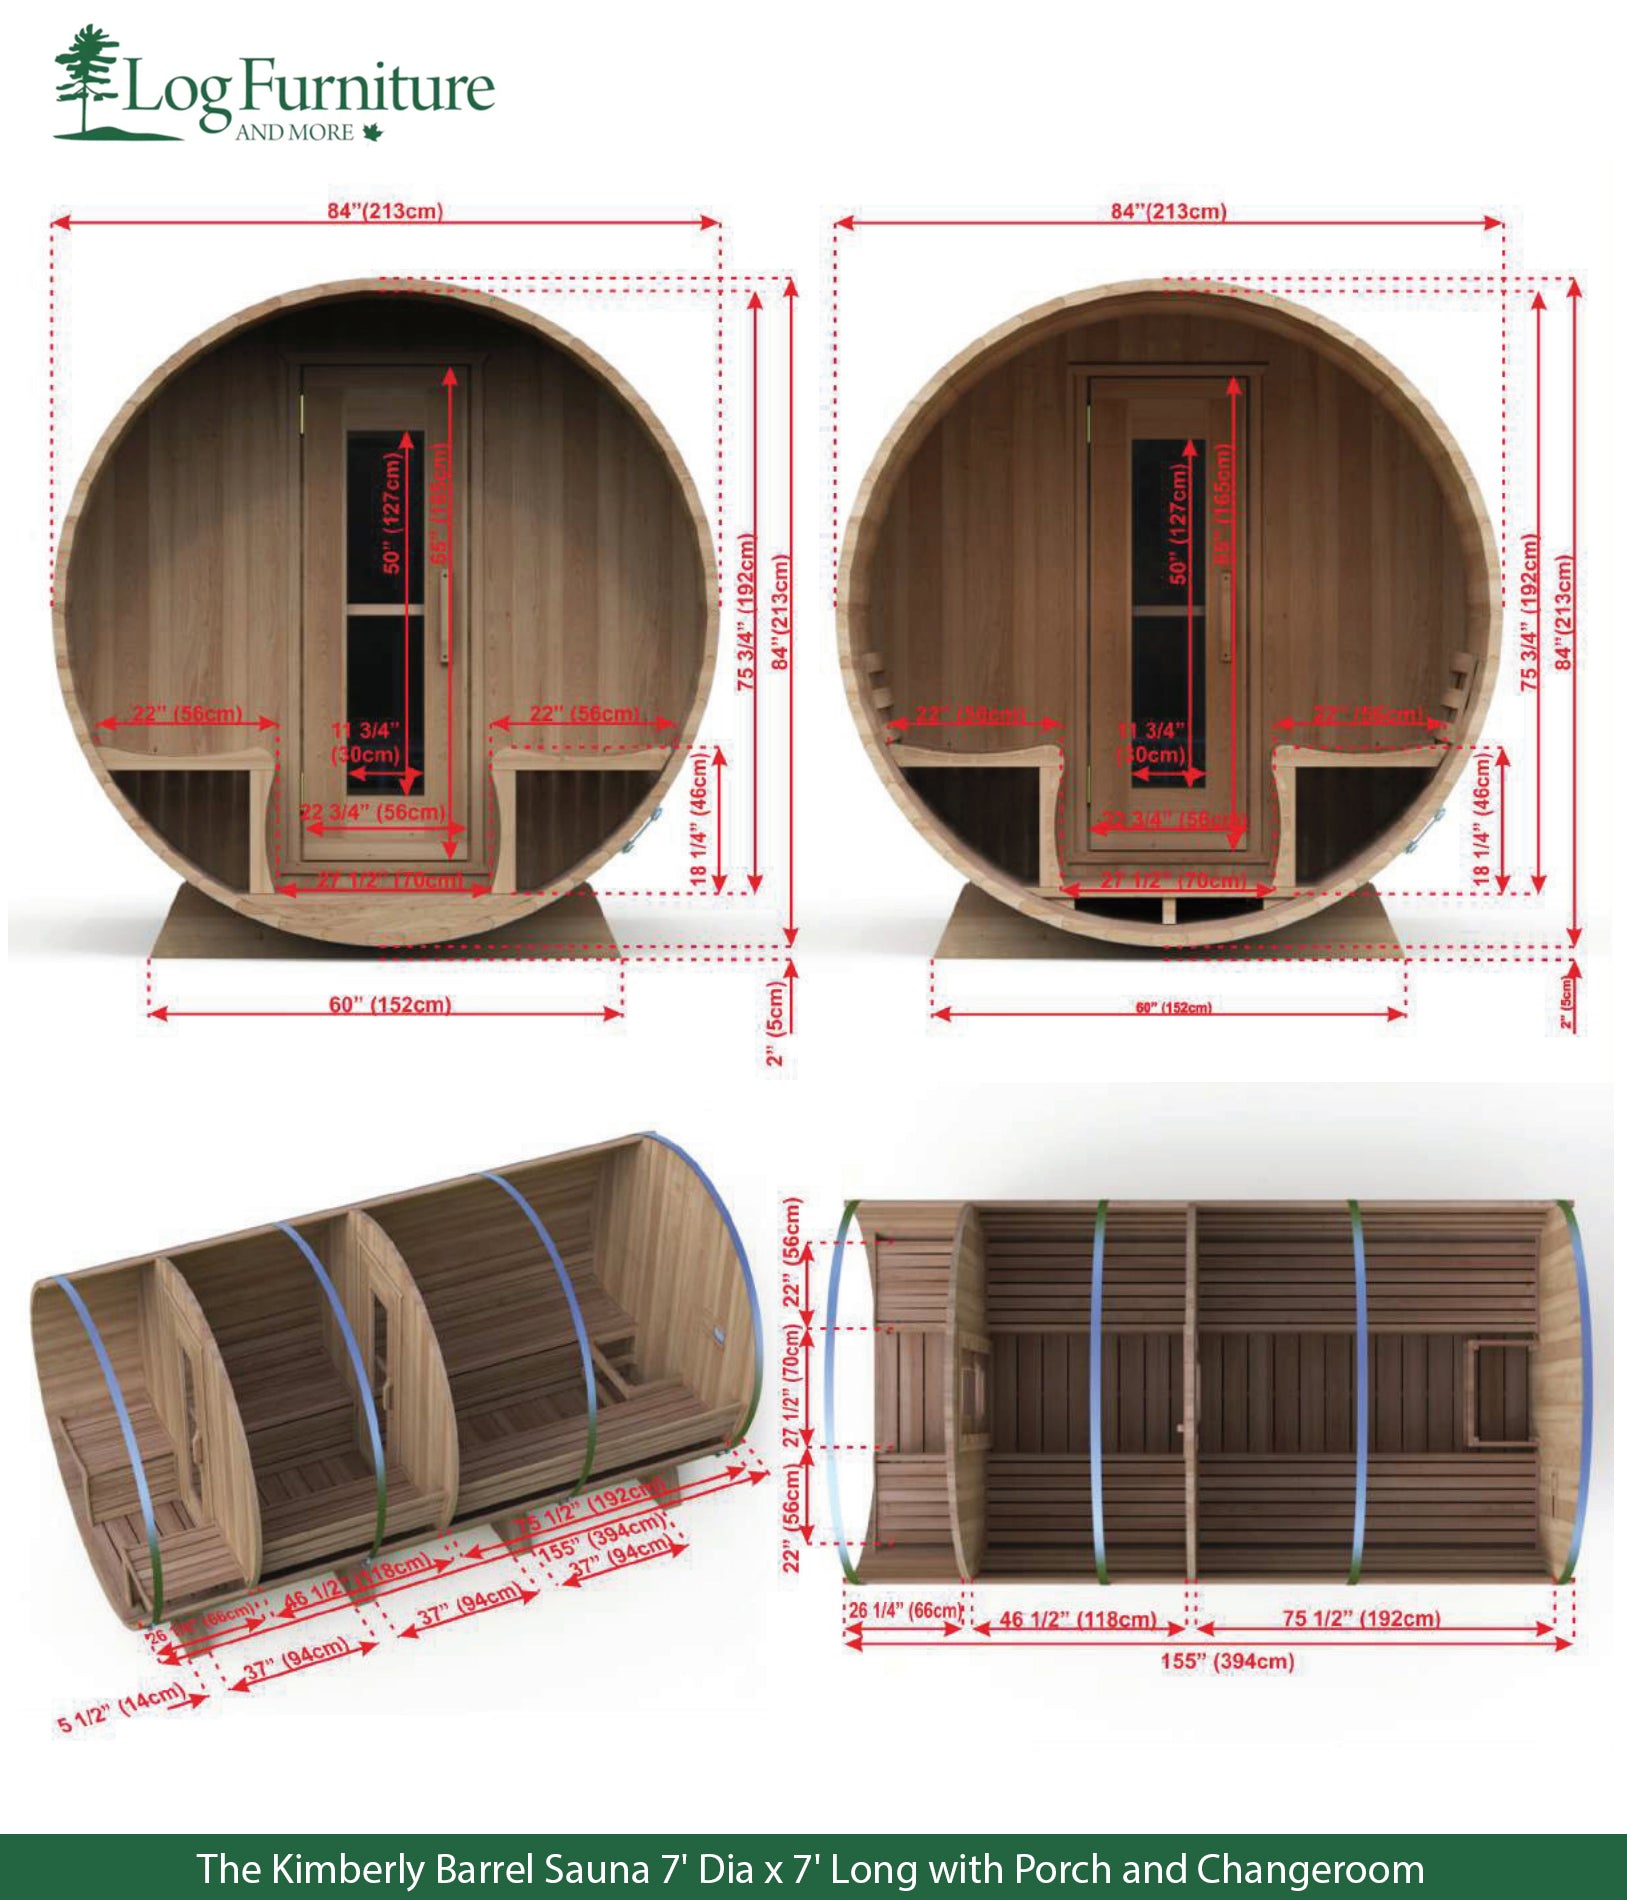 The Kimberly Barrel Sauna 7' Dia x 7' Long with Porch and Changeroom